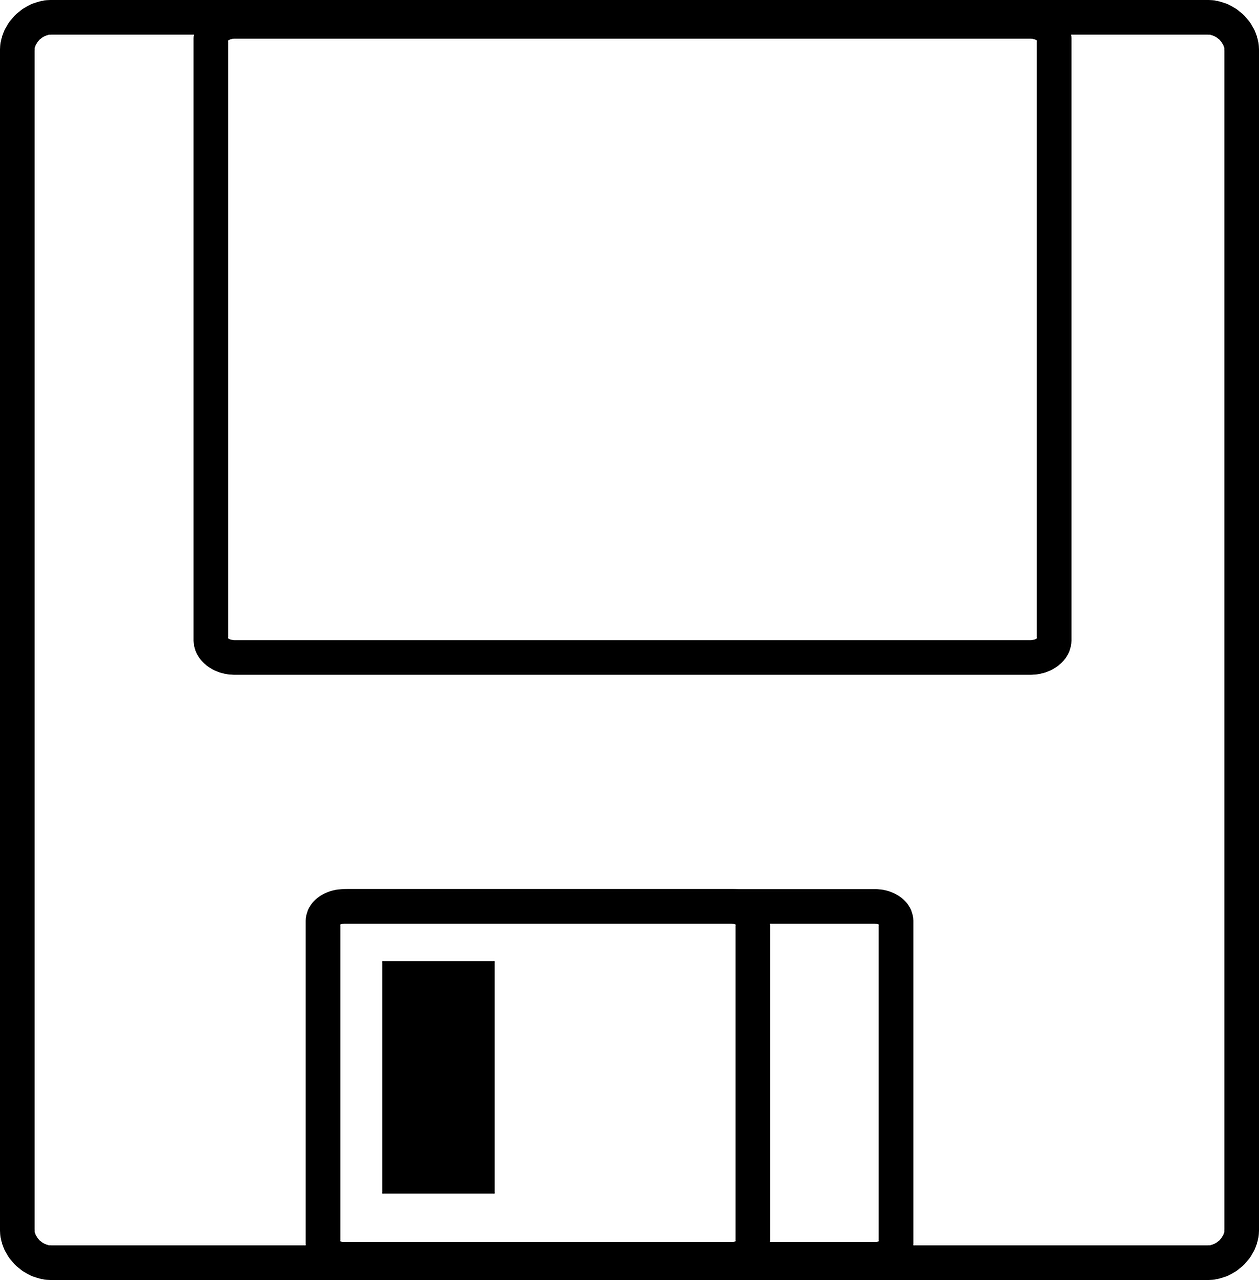 a floppy disk sitting on top of a table, pixel art, dribble, icon black and white, 2 0 5 6 x 2 0 5 6, window, outline art